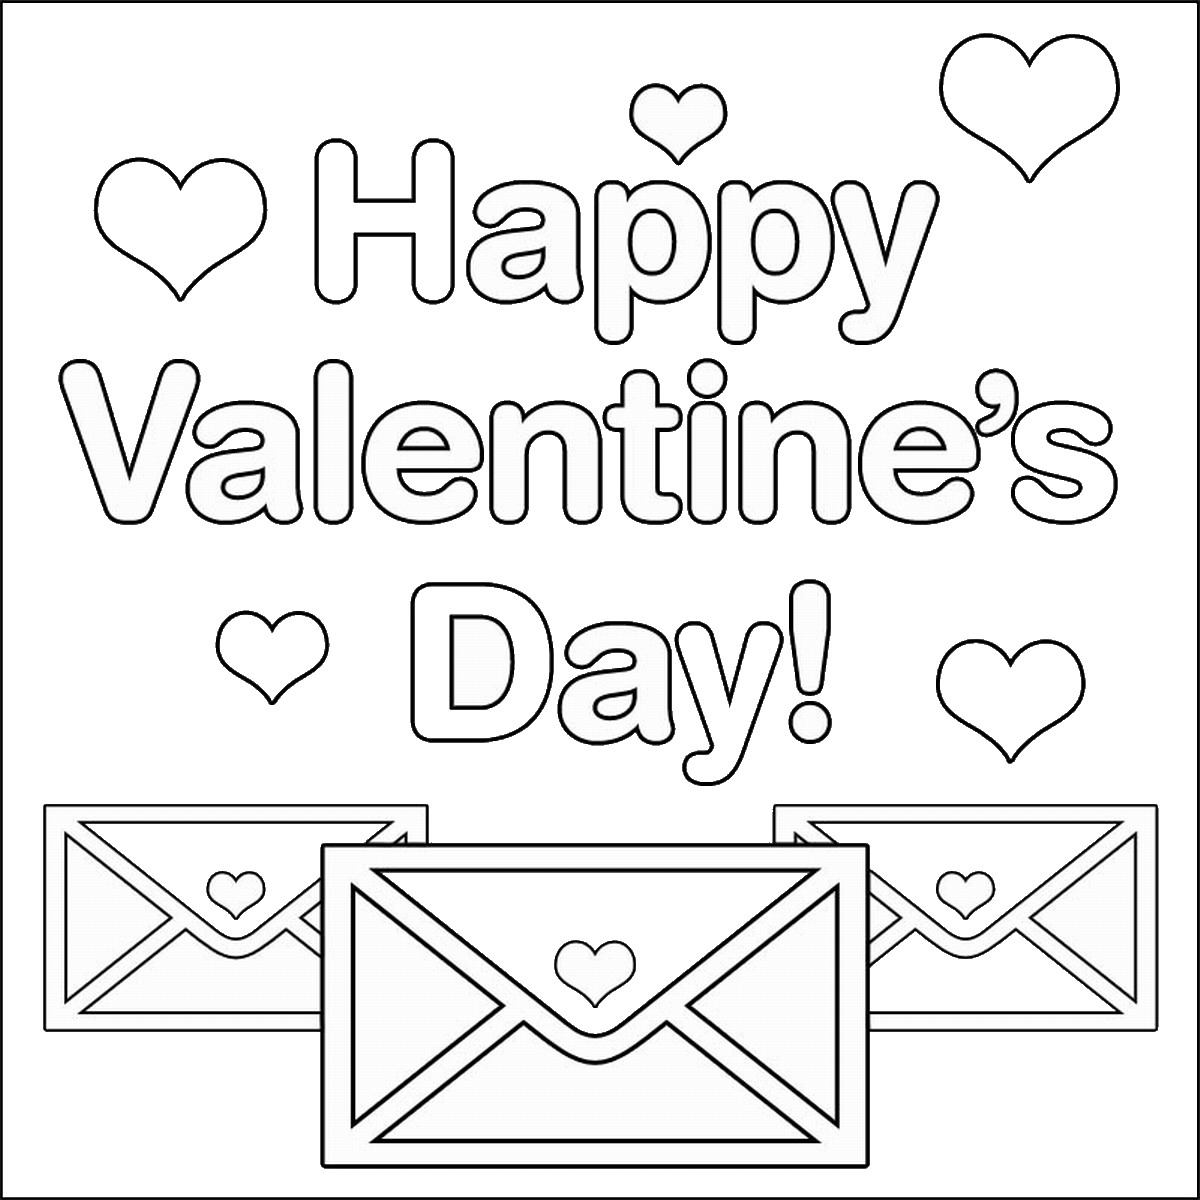 Happy Valentines Day Letters With Hearts Coloring Page